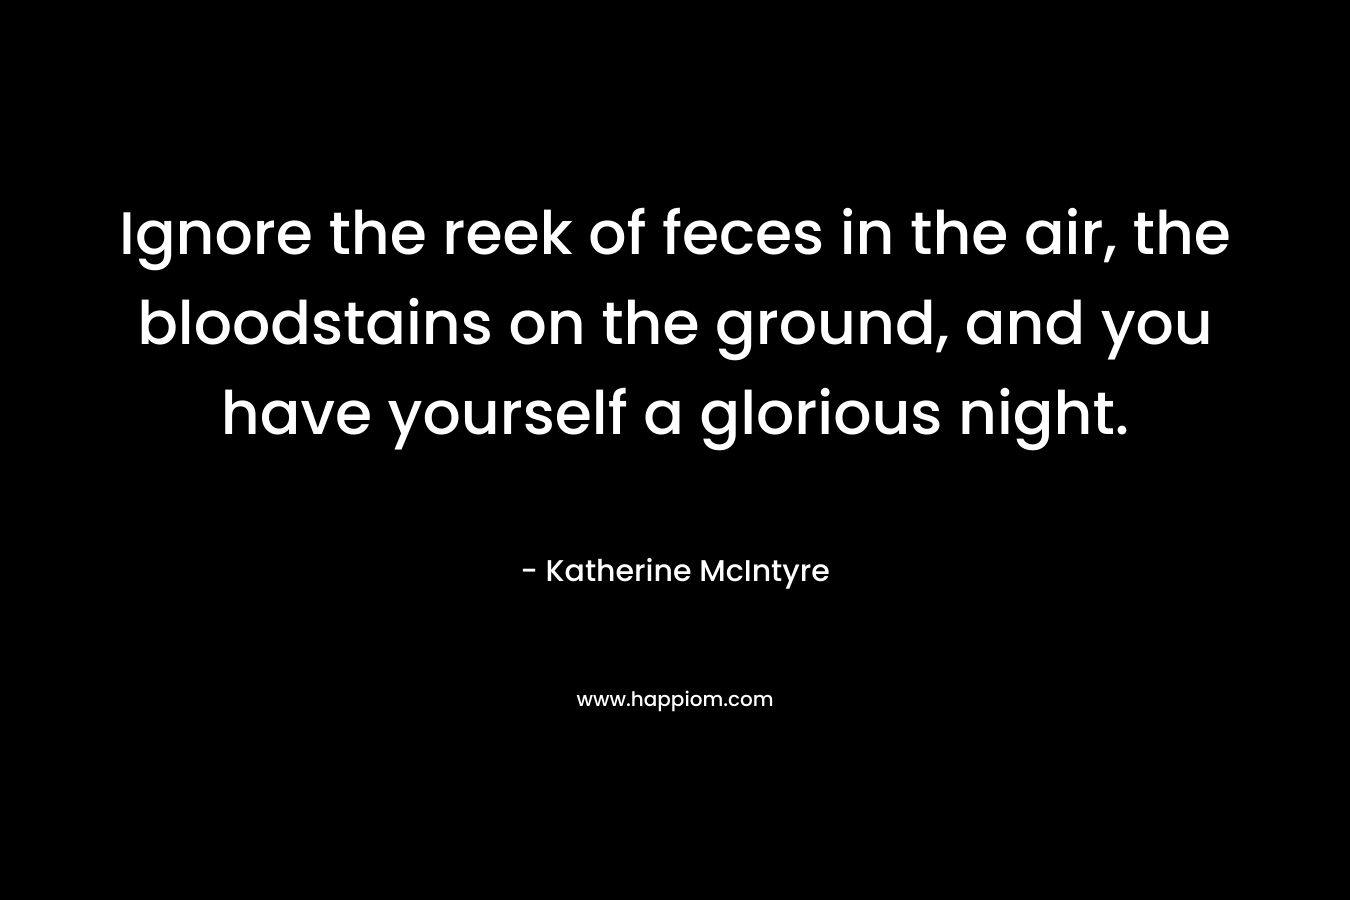 Ignore the reek of feces in the air, the bloodstains on the ground, and you have yourself a glorious night. – Katherine McIntyre